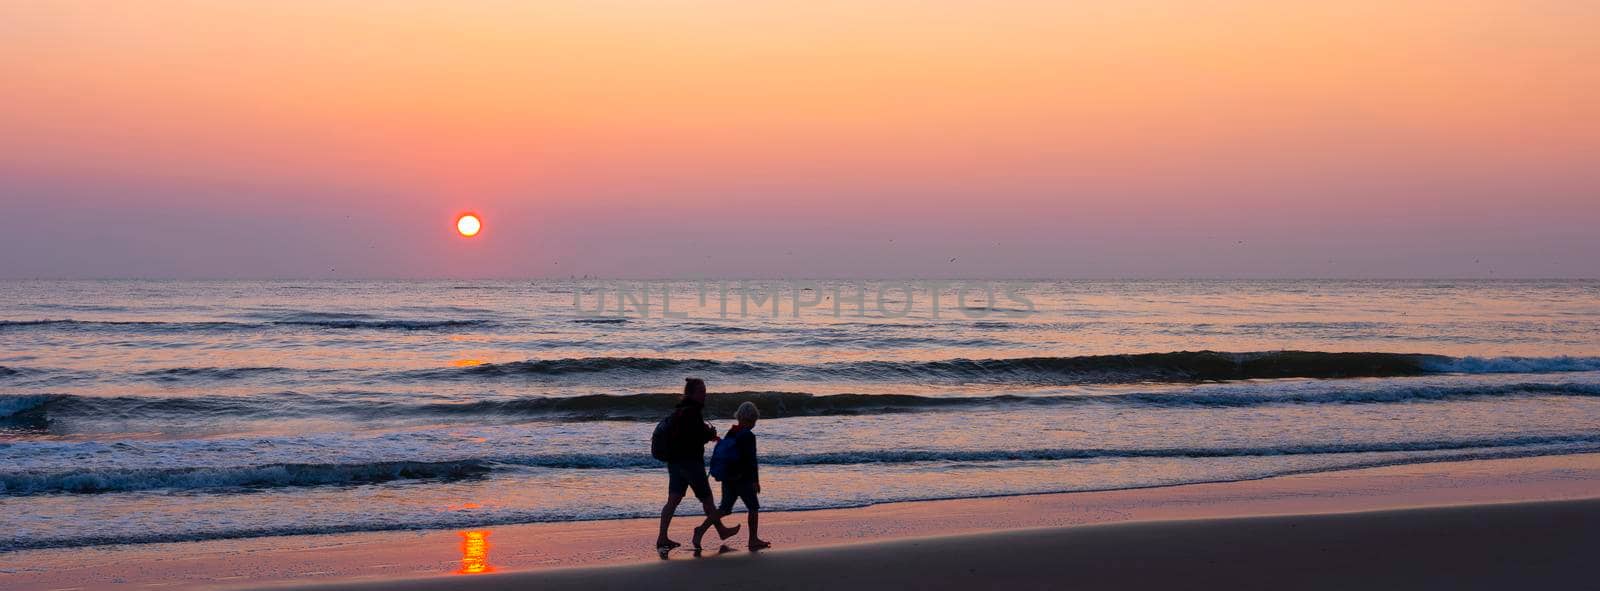 mother and child walk on beach during colorful sunset over north sea on island of texel in the netherlands